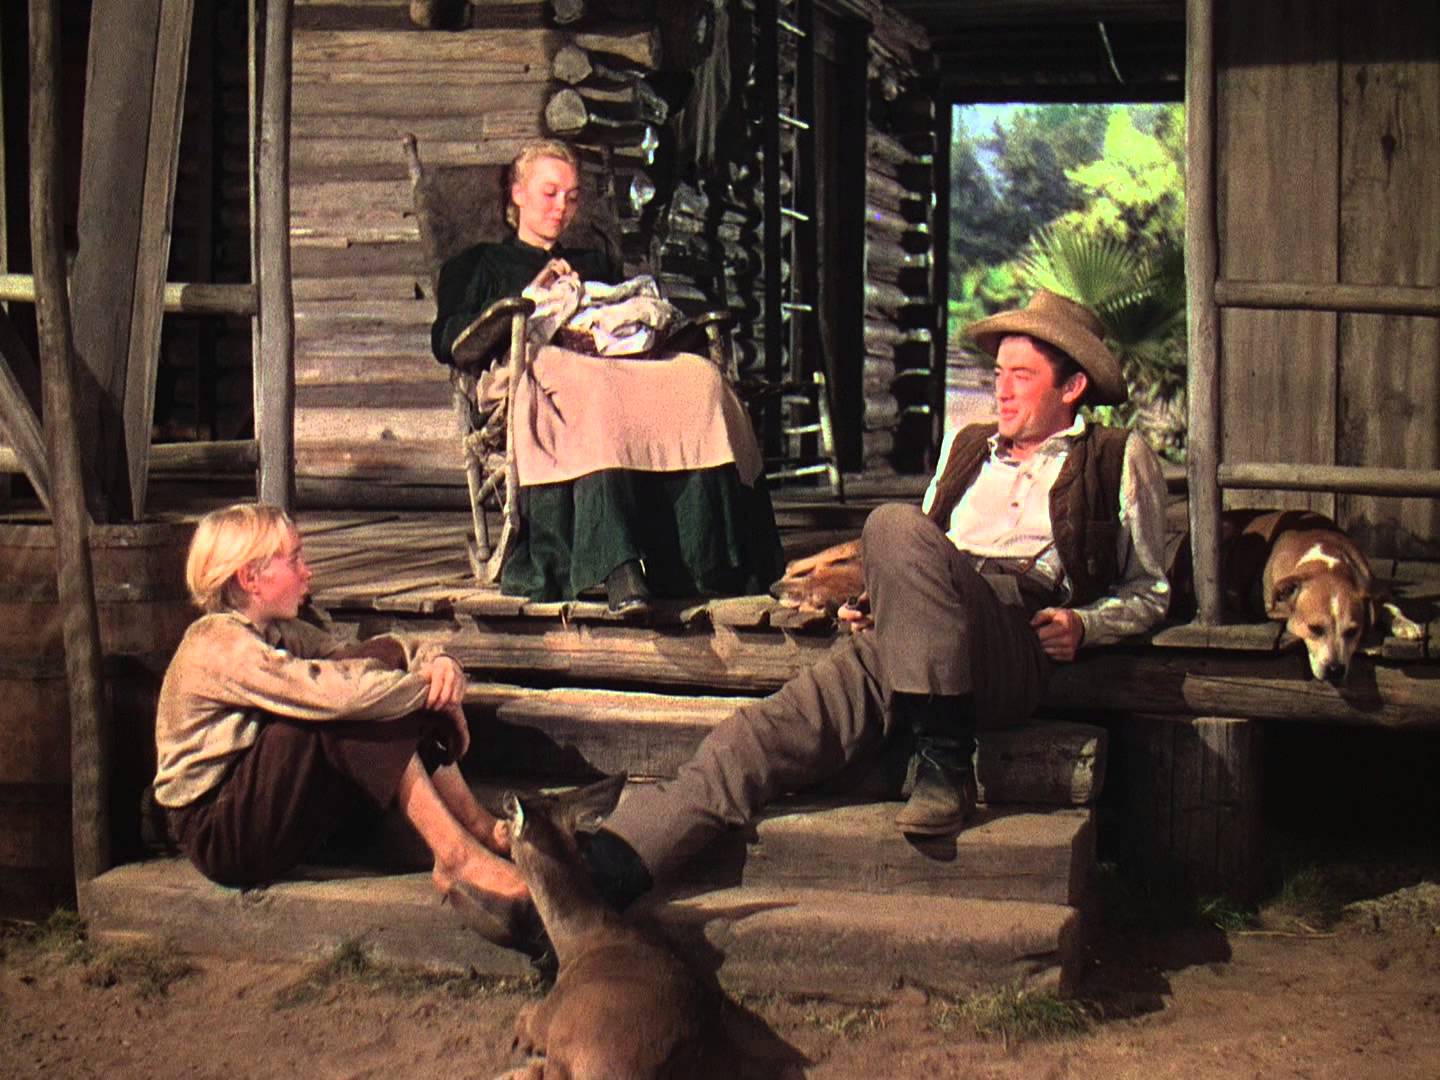 A scene from The Yearling